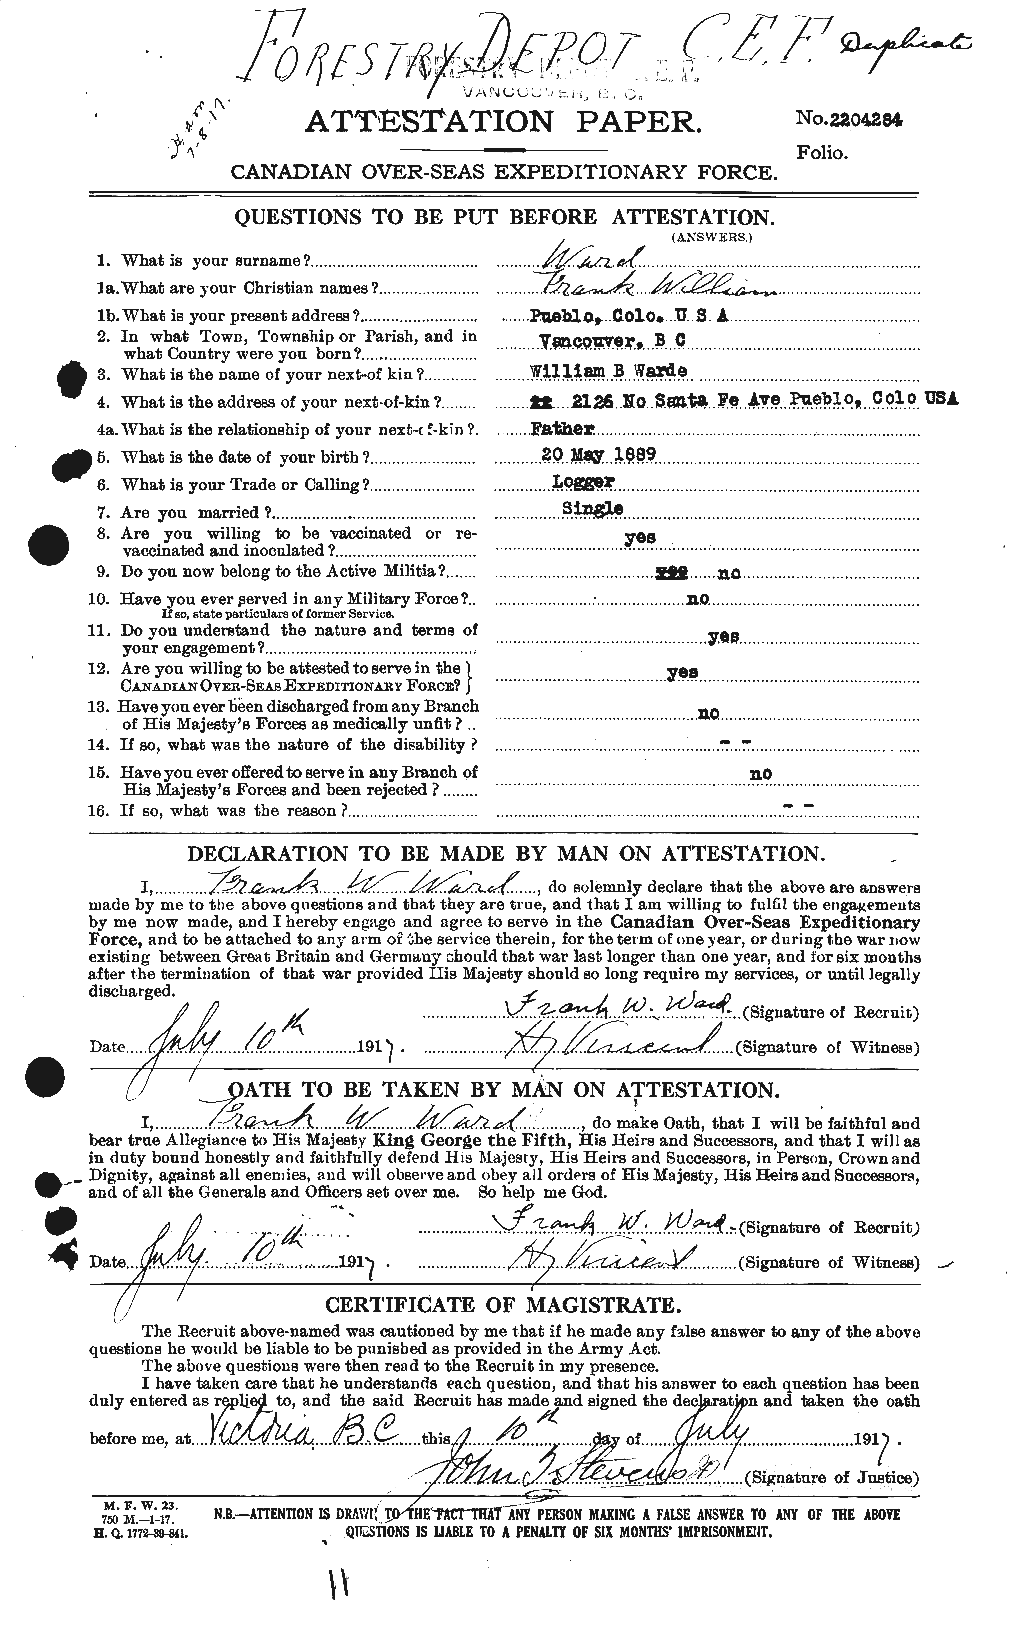 Personnel Records of the First World War - CEF 657700a